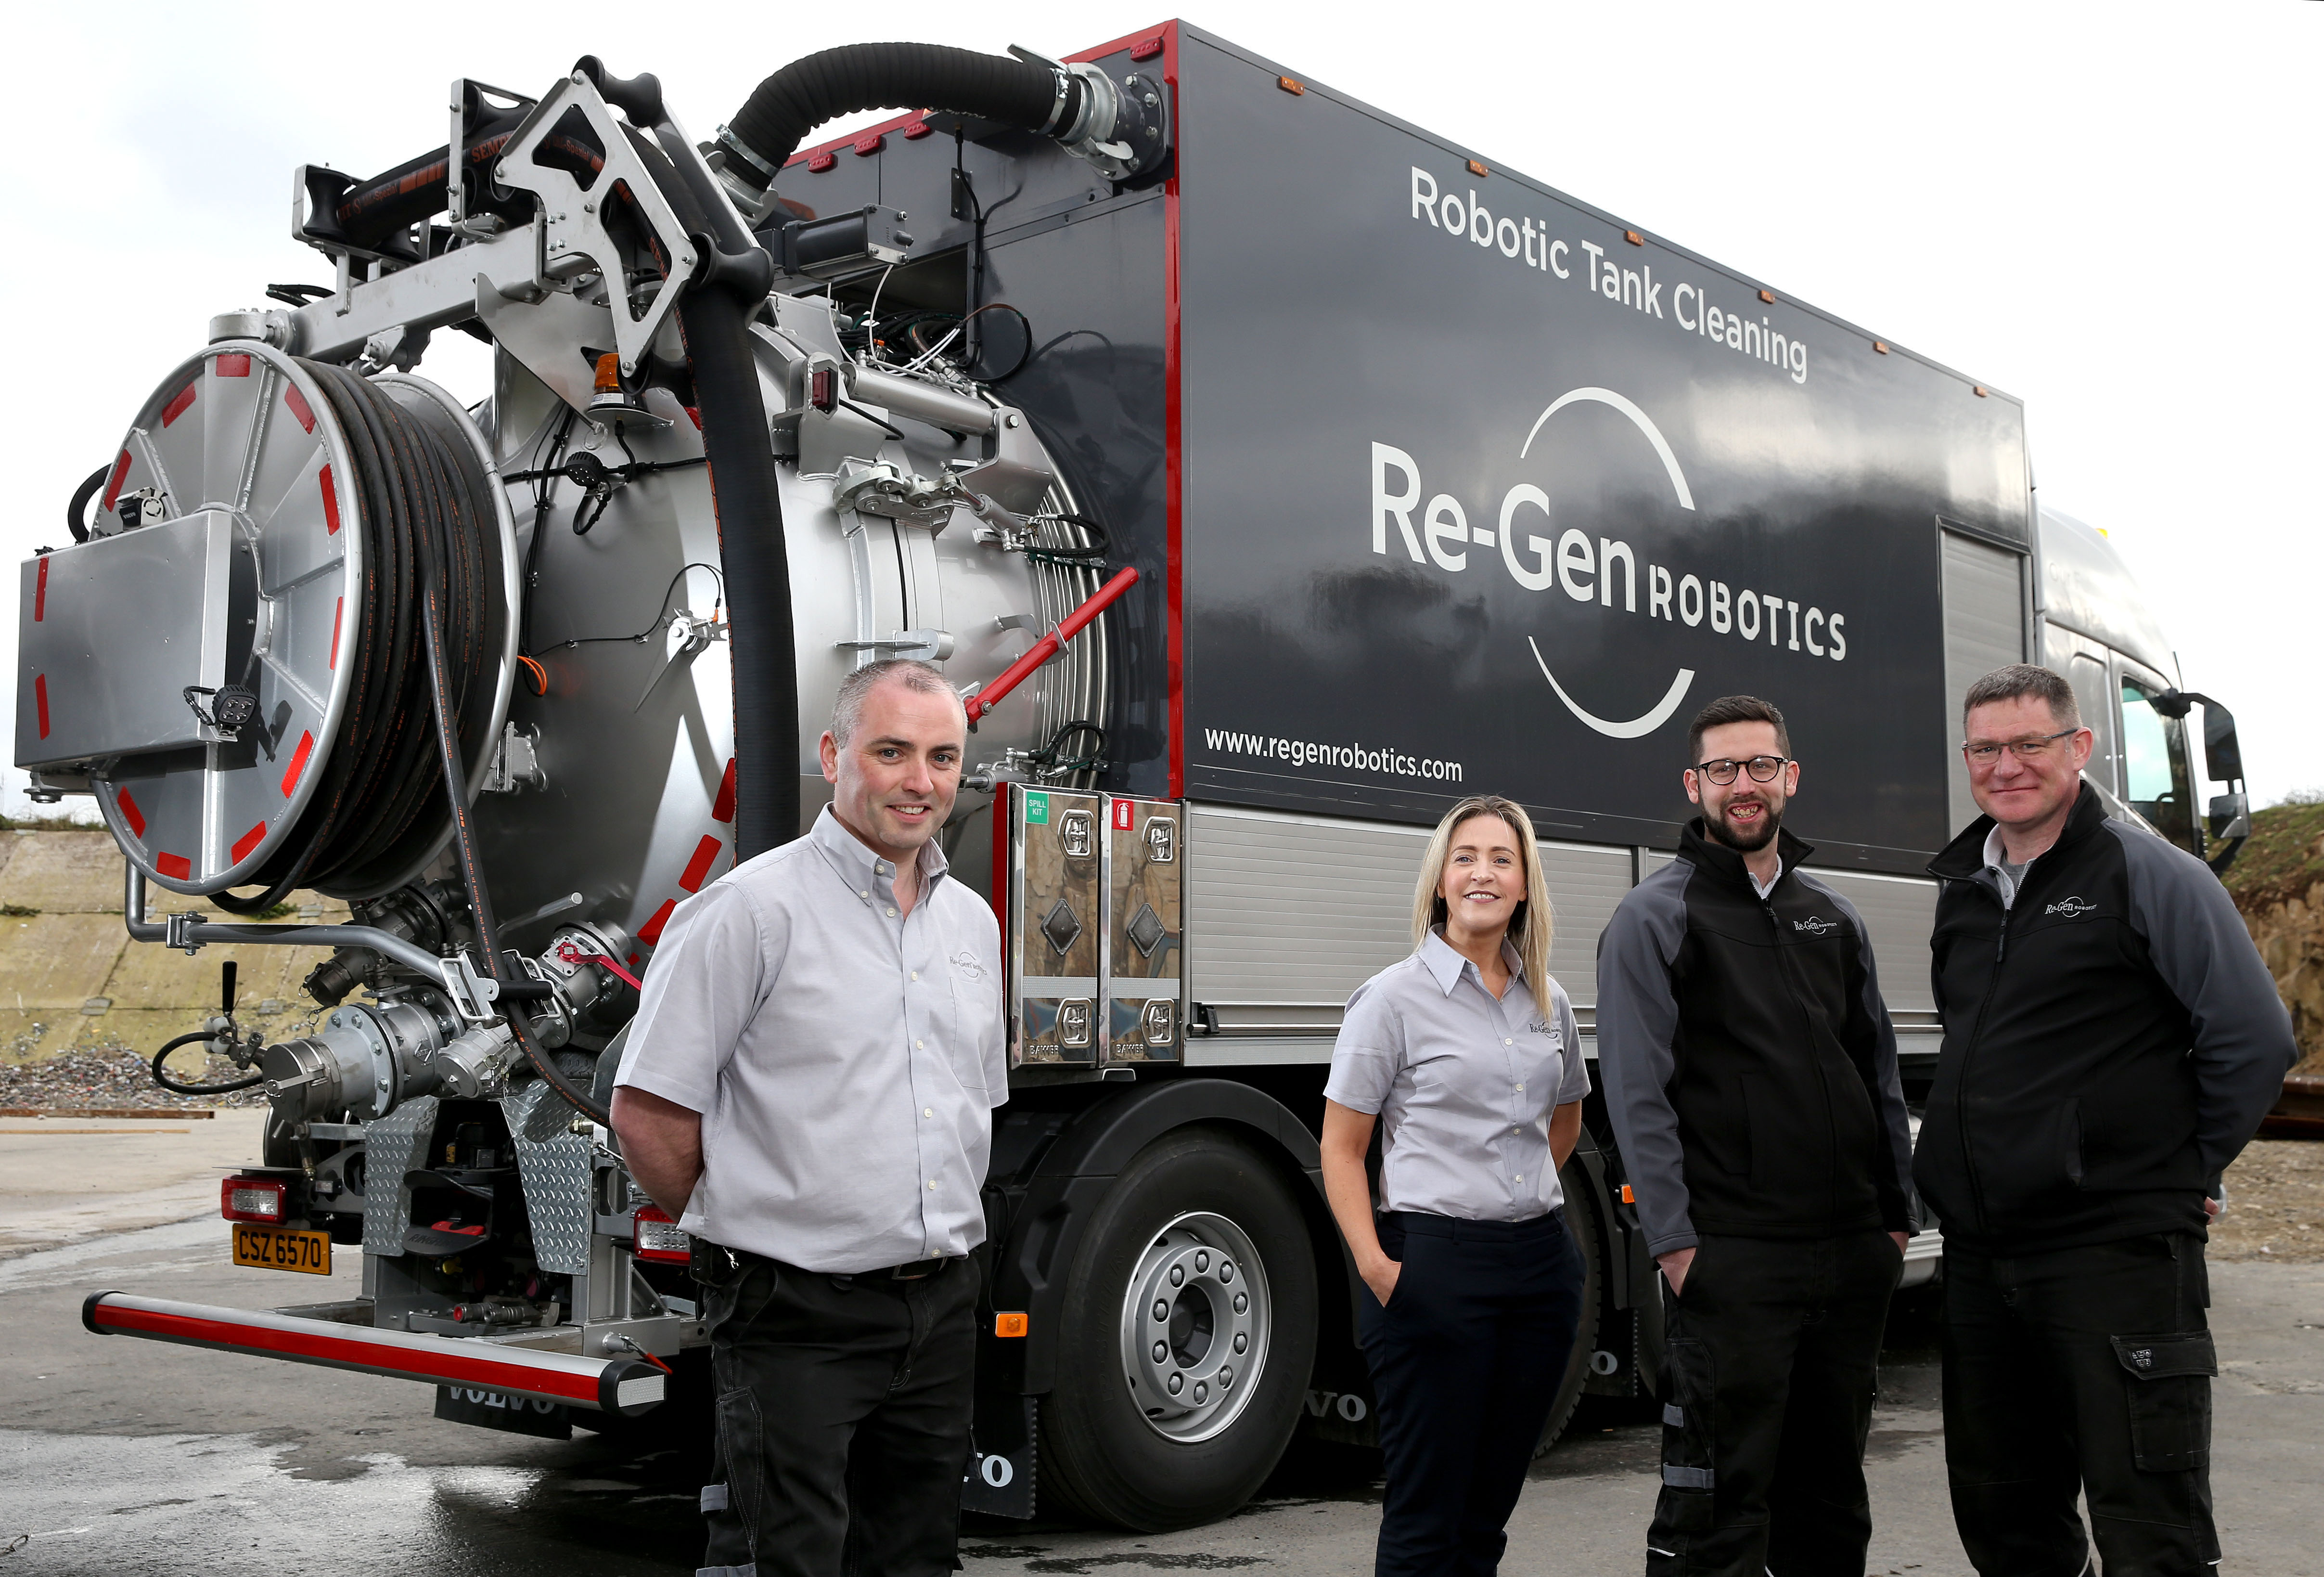 Re-Gen Robotics invests £1.5m in life-saving cleaning robots